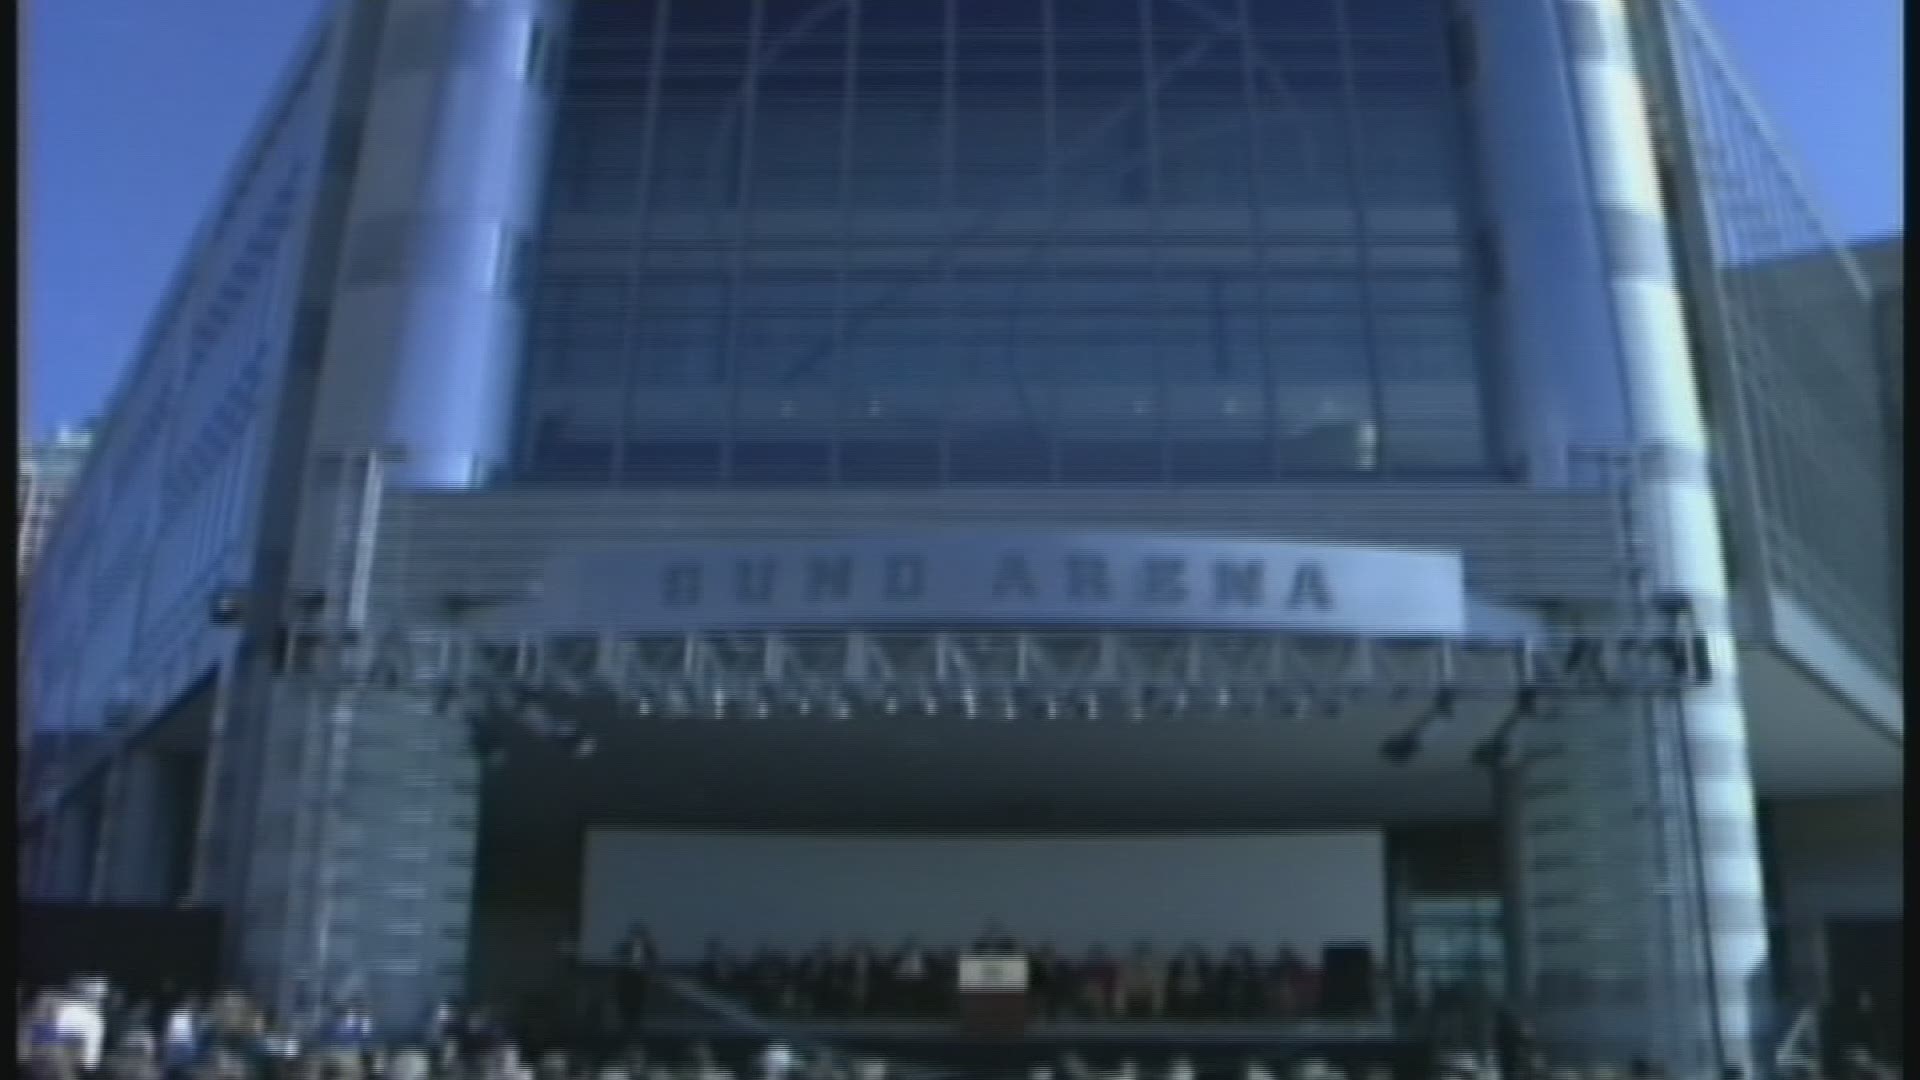 70 moments in WKYC history: Gund Arena opens its doors in 1994